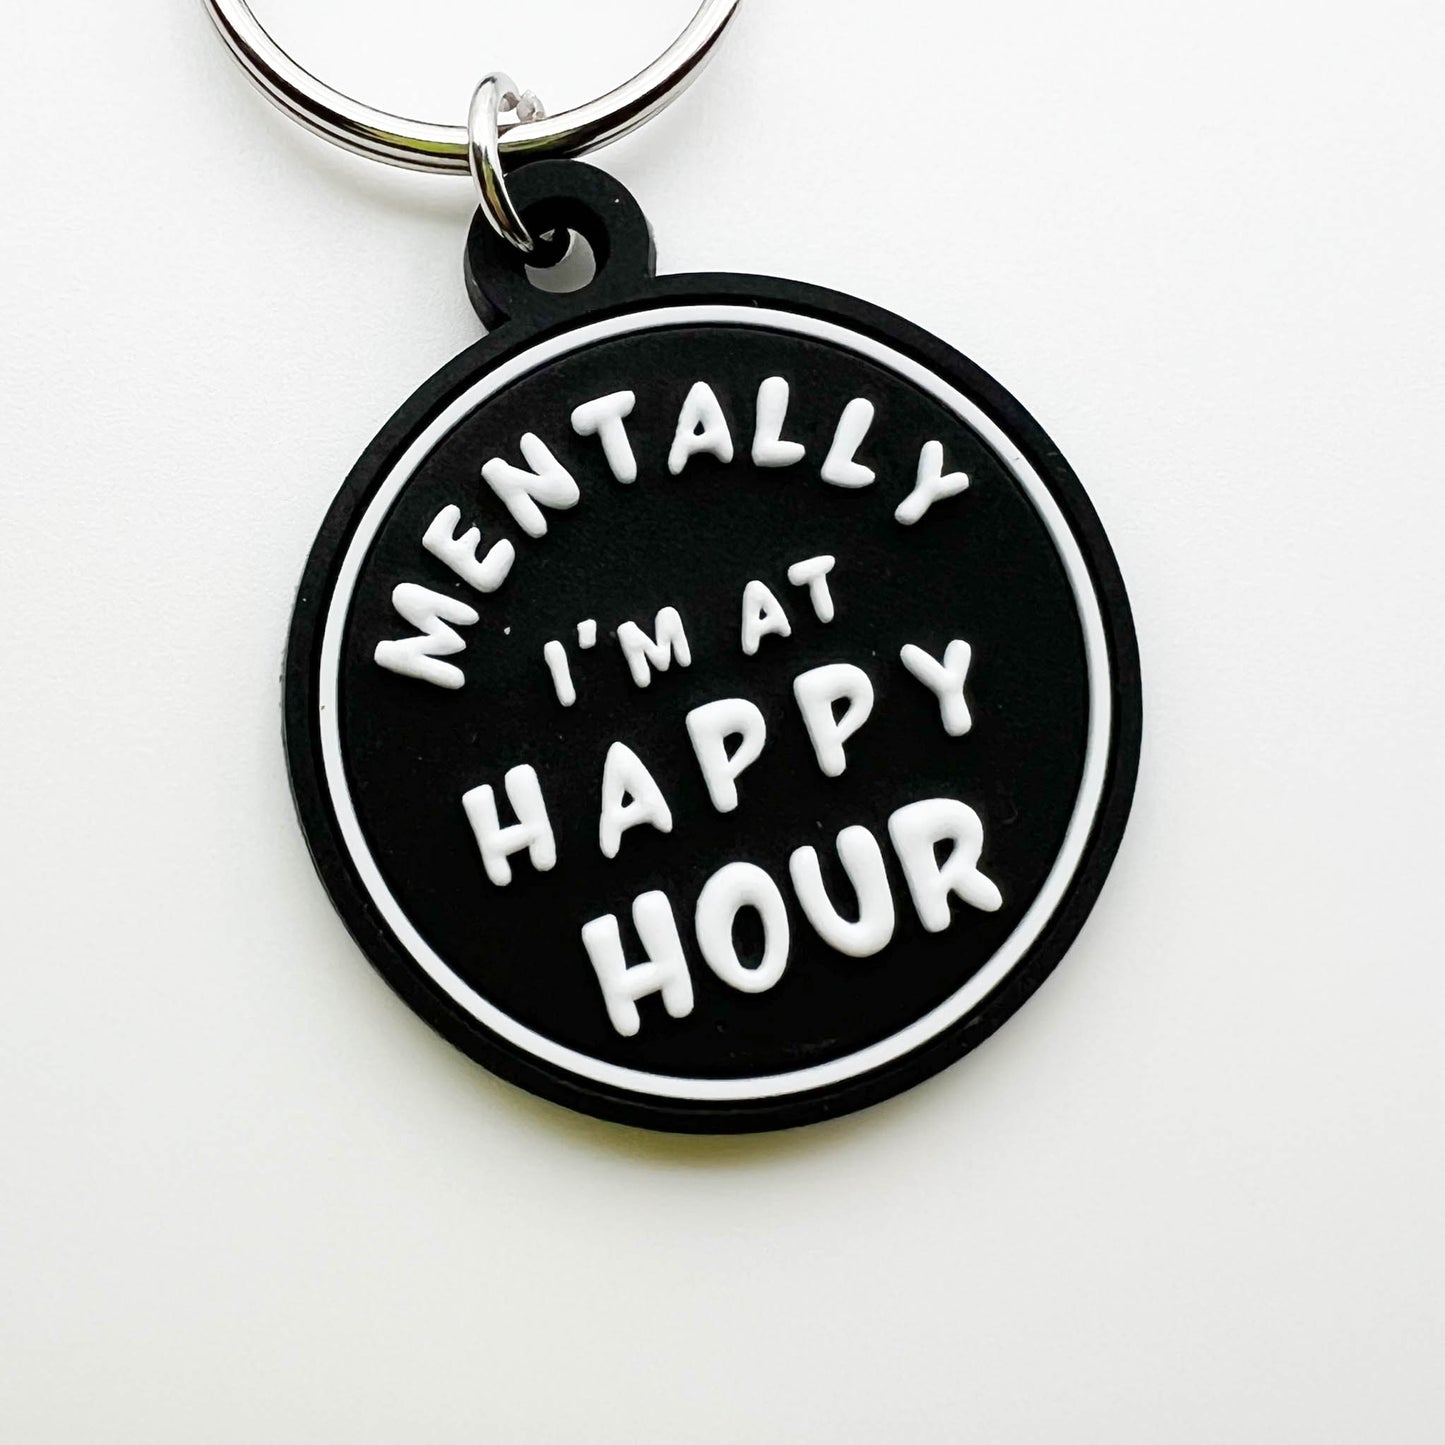 Funny Dog Collar Charm - Mentally I'm at Happy Hour